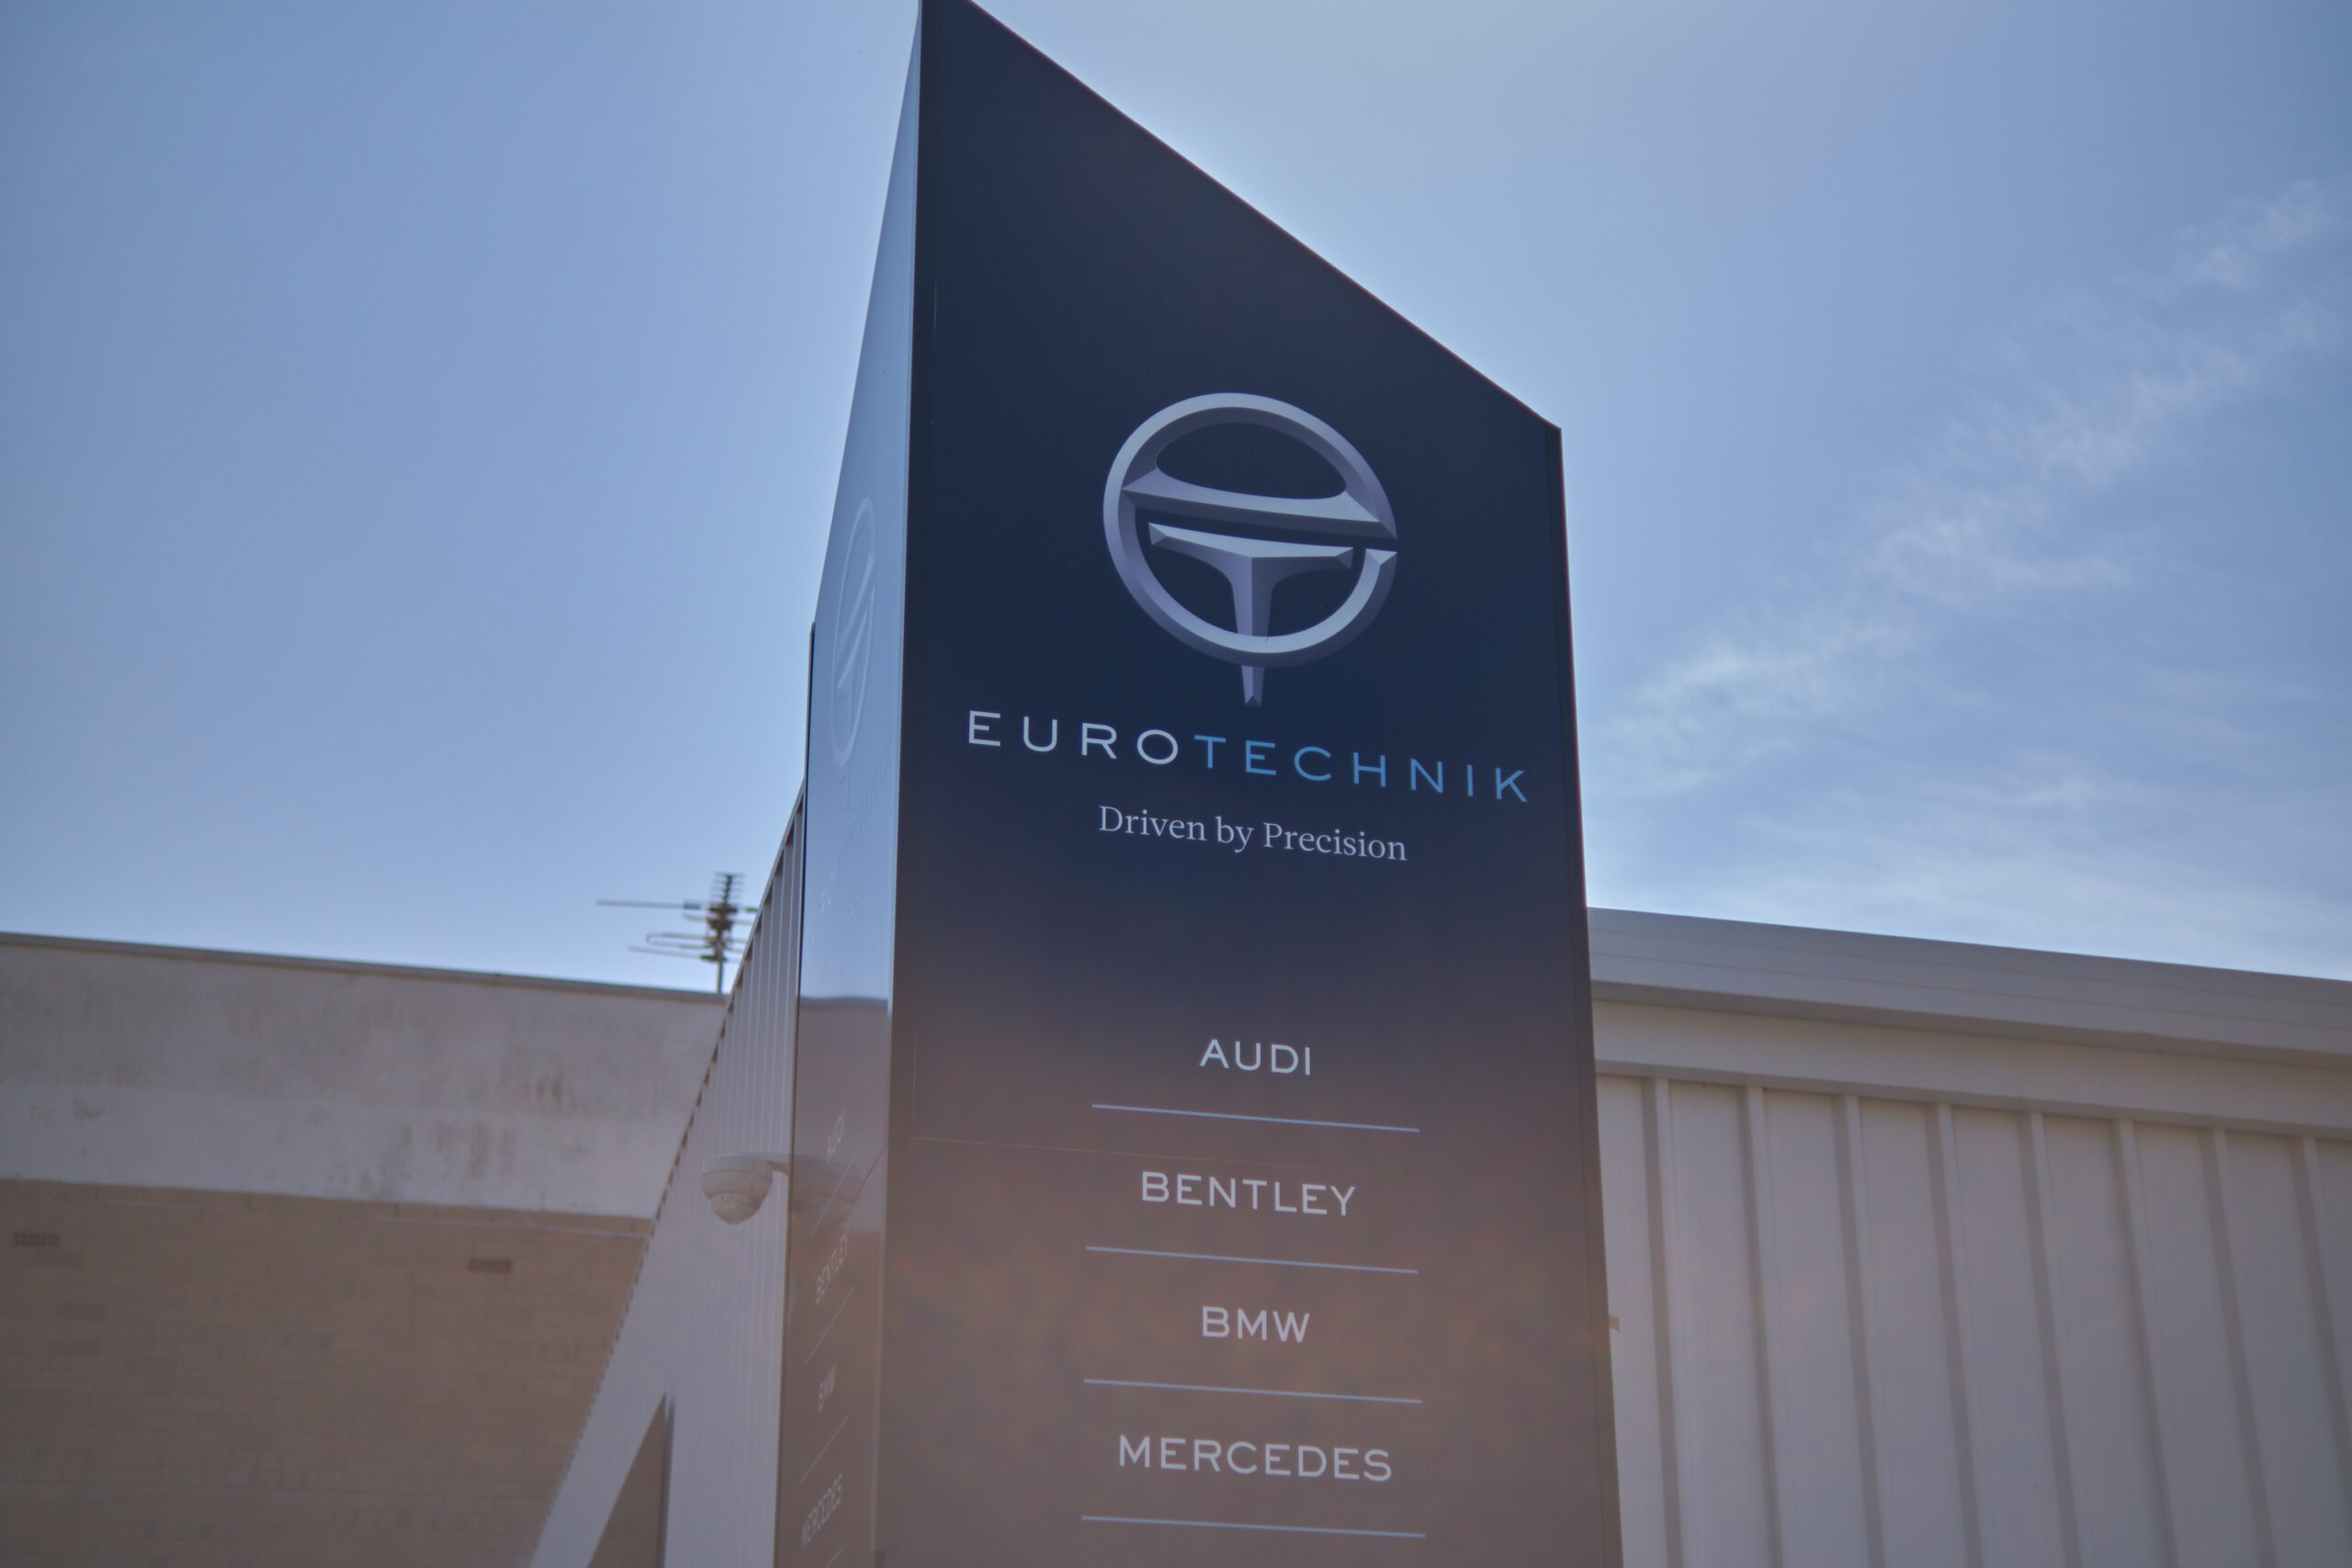 Euro Technik: Putting people first for the benefit of the customer